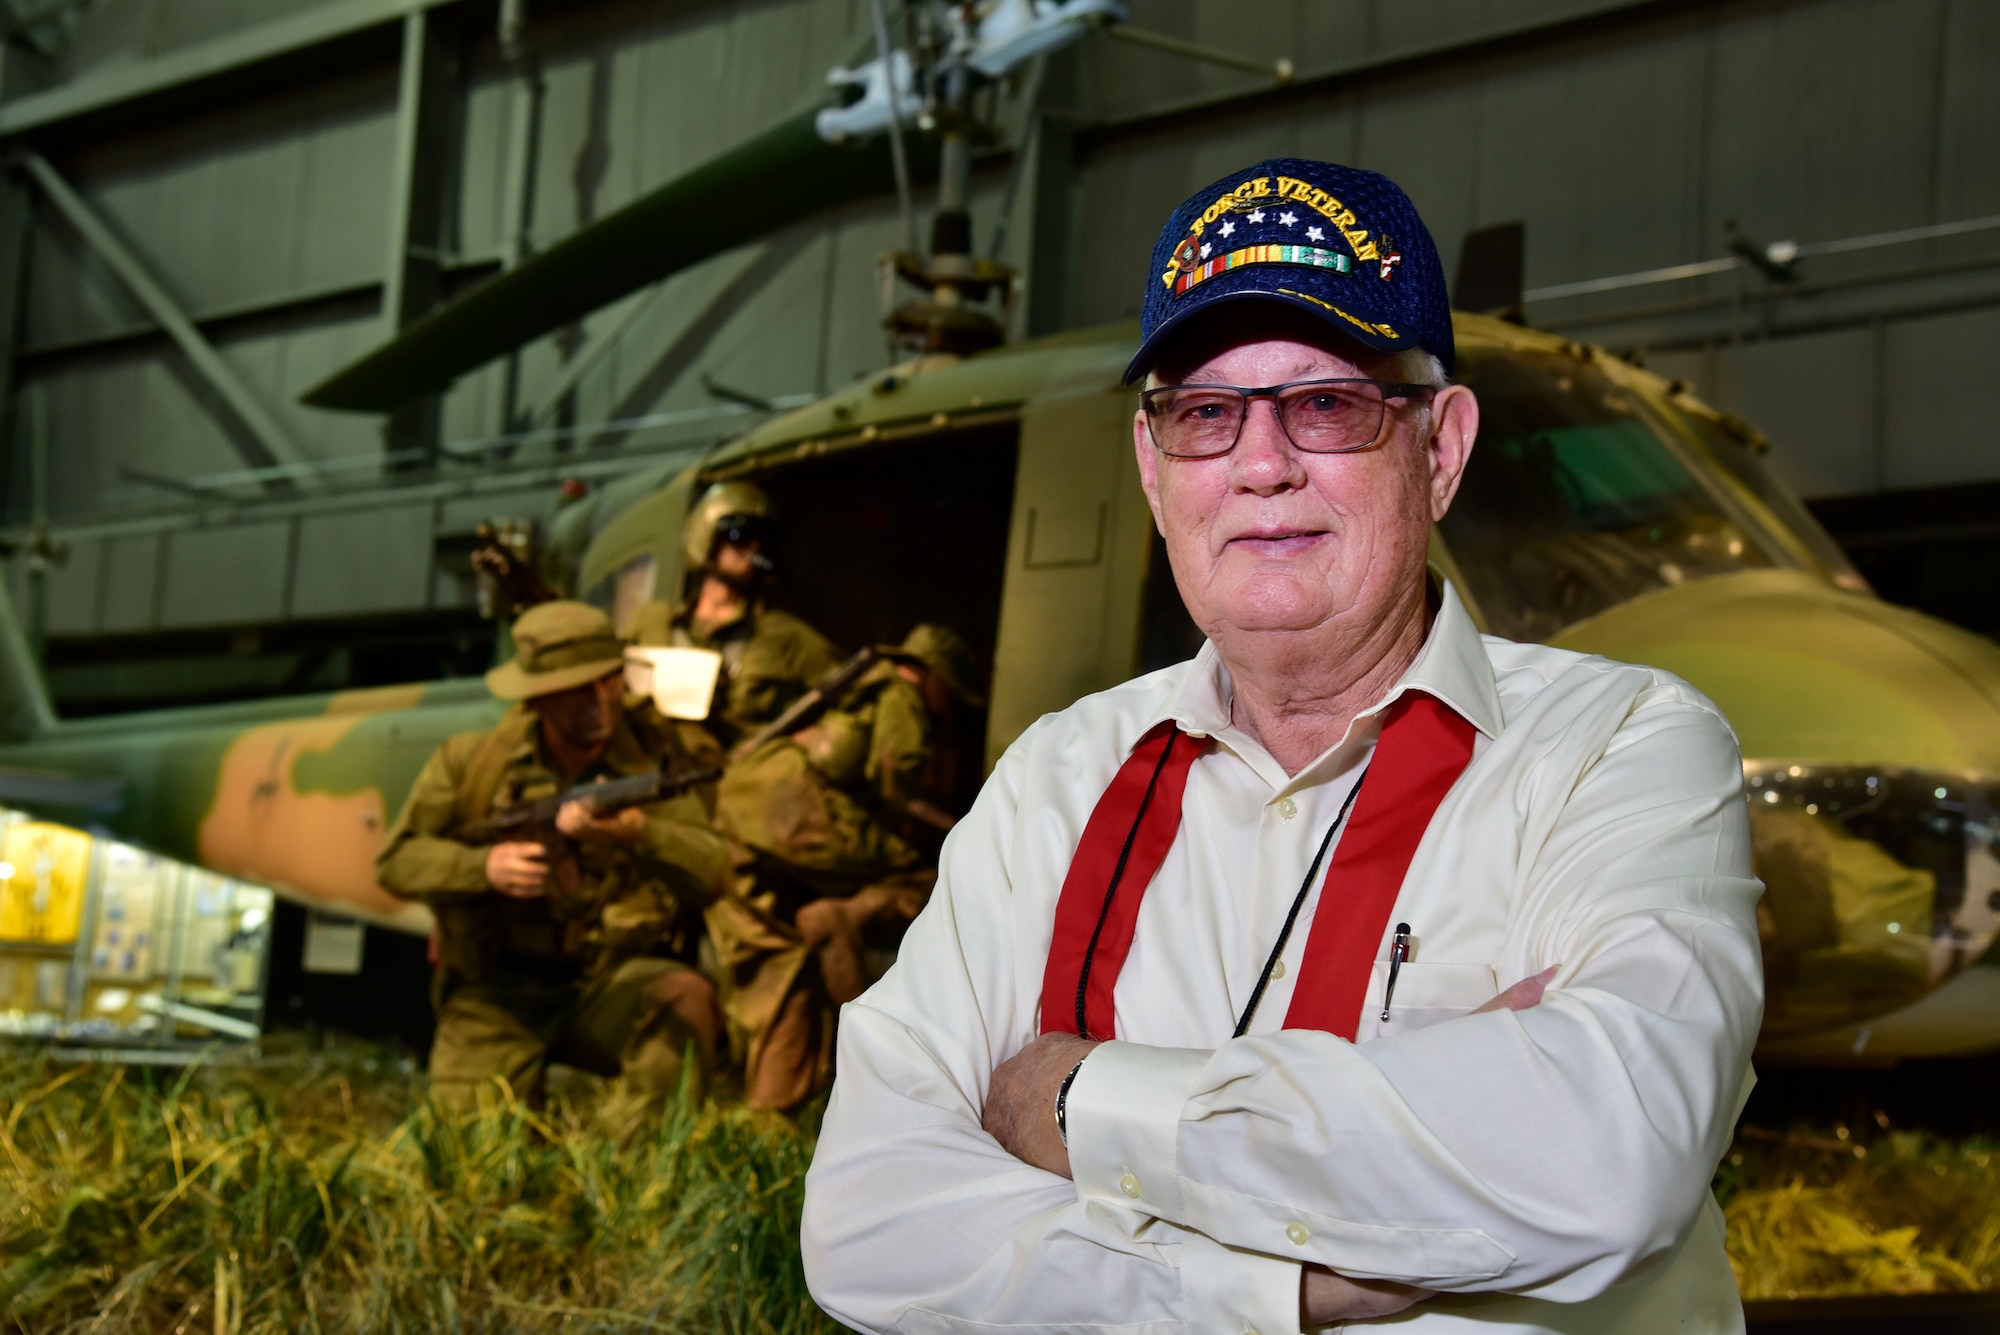 DAYTON, Ohio -- MSgt. (Ret.) Fred Cook stands in front of the Secret War diorama in the Southeast Asia War Gallery at the National Museum of the U.S. Air Force on Sept. 15, 2016. Cook served his second tour in Southeast Asia  with the 20th SOS "Green Hornets" at Nha Trang and Ban Me Thout, Vietnam. He was the right door gunner on the 26 Nov 1968 mission that is depicted in the National Museum of the U.S. Air Force’s UH-1P, 20th SOS “Green Hornets,” legacy diorama display. He was awarded the Distinguished Flying Cross for Valor for his part in this mission.(U.S. Air Force photo by Ken LaRock)
